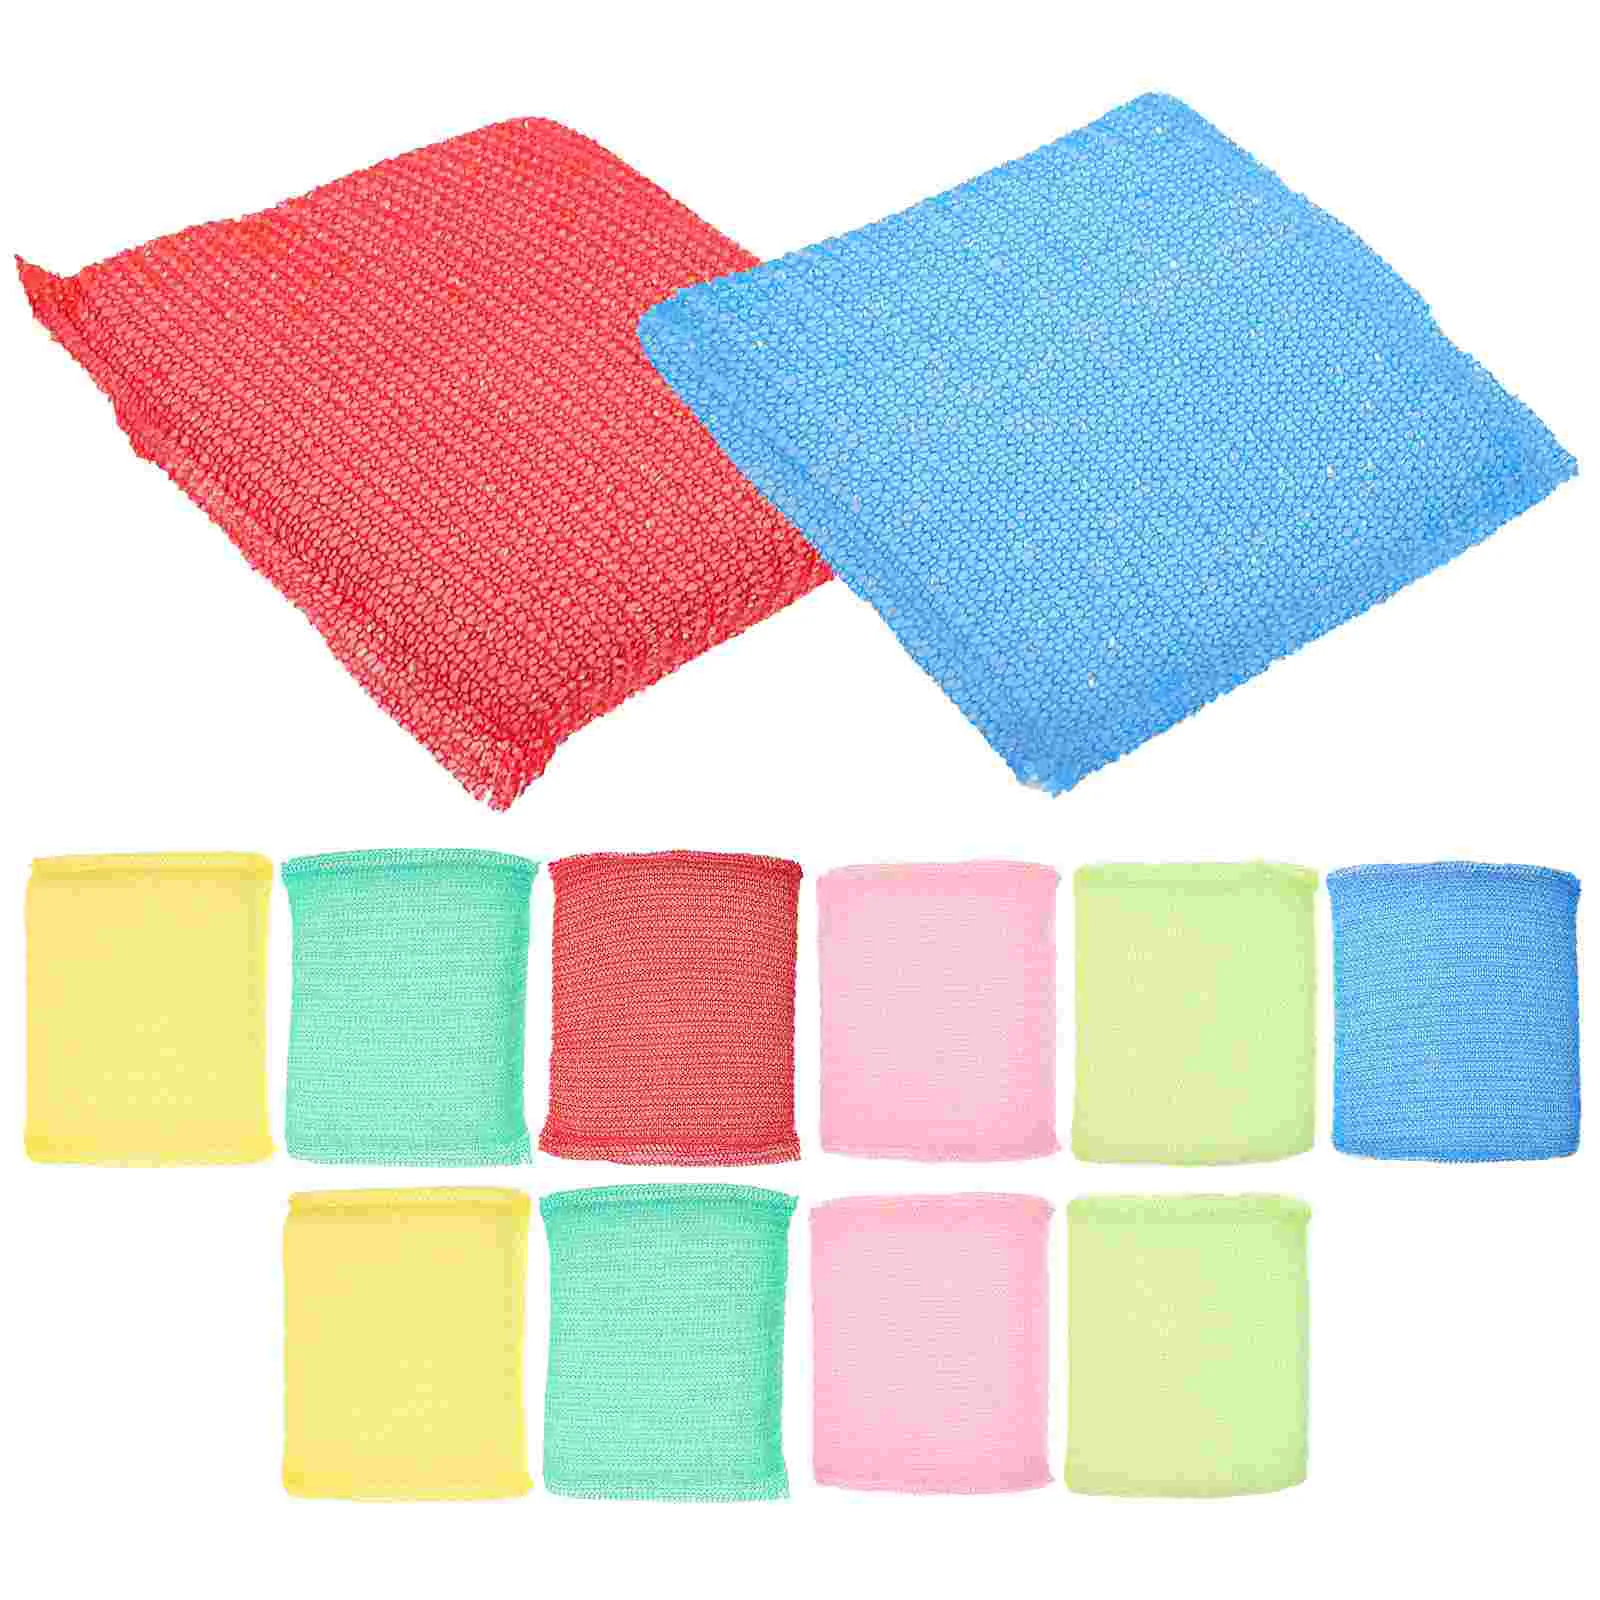 

Kitchen Dish Sponge Cleaning Supplies Scrub Pads Dishes Sink Sponges Small Appliances Washing Scrubbers Scouring